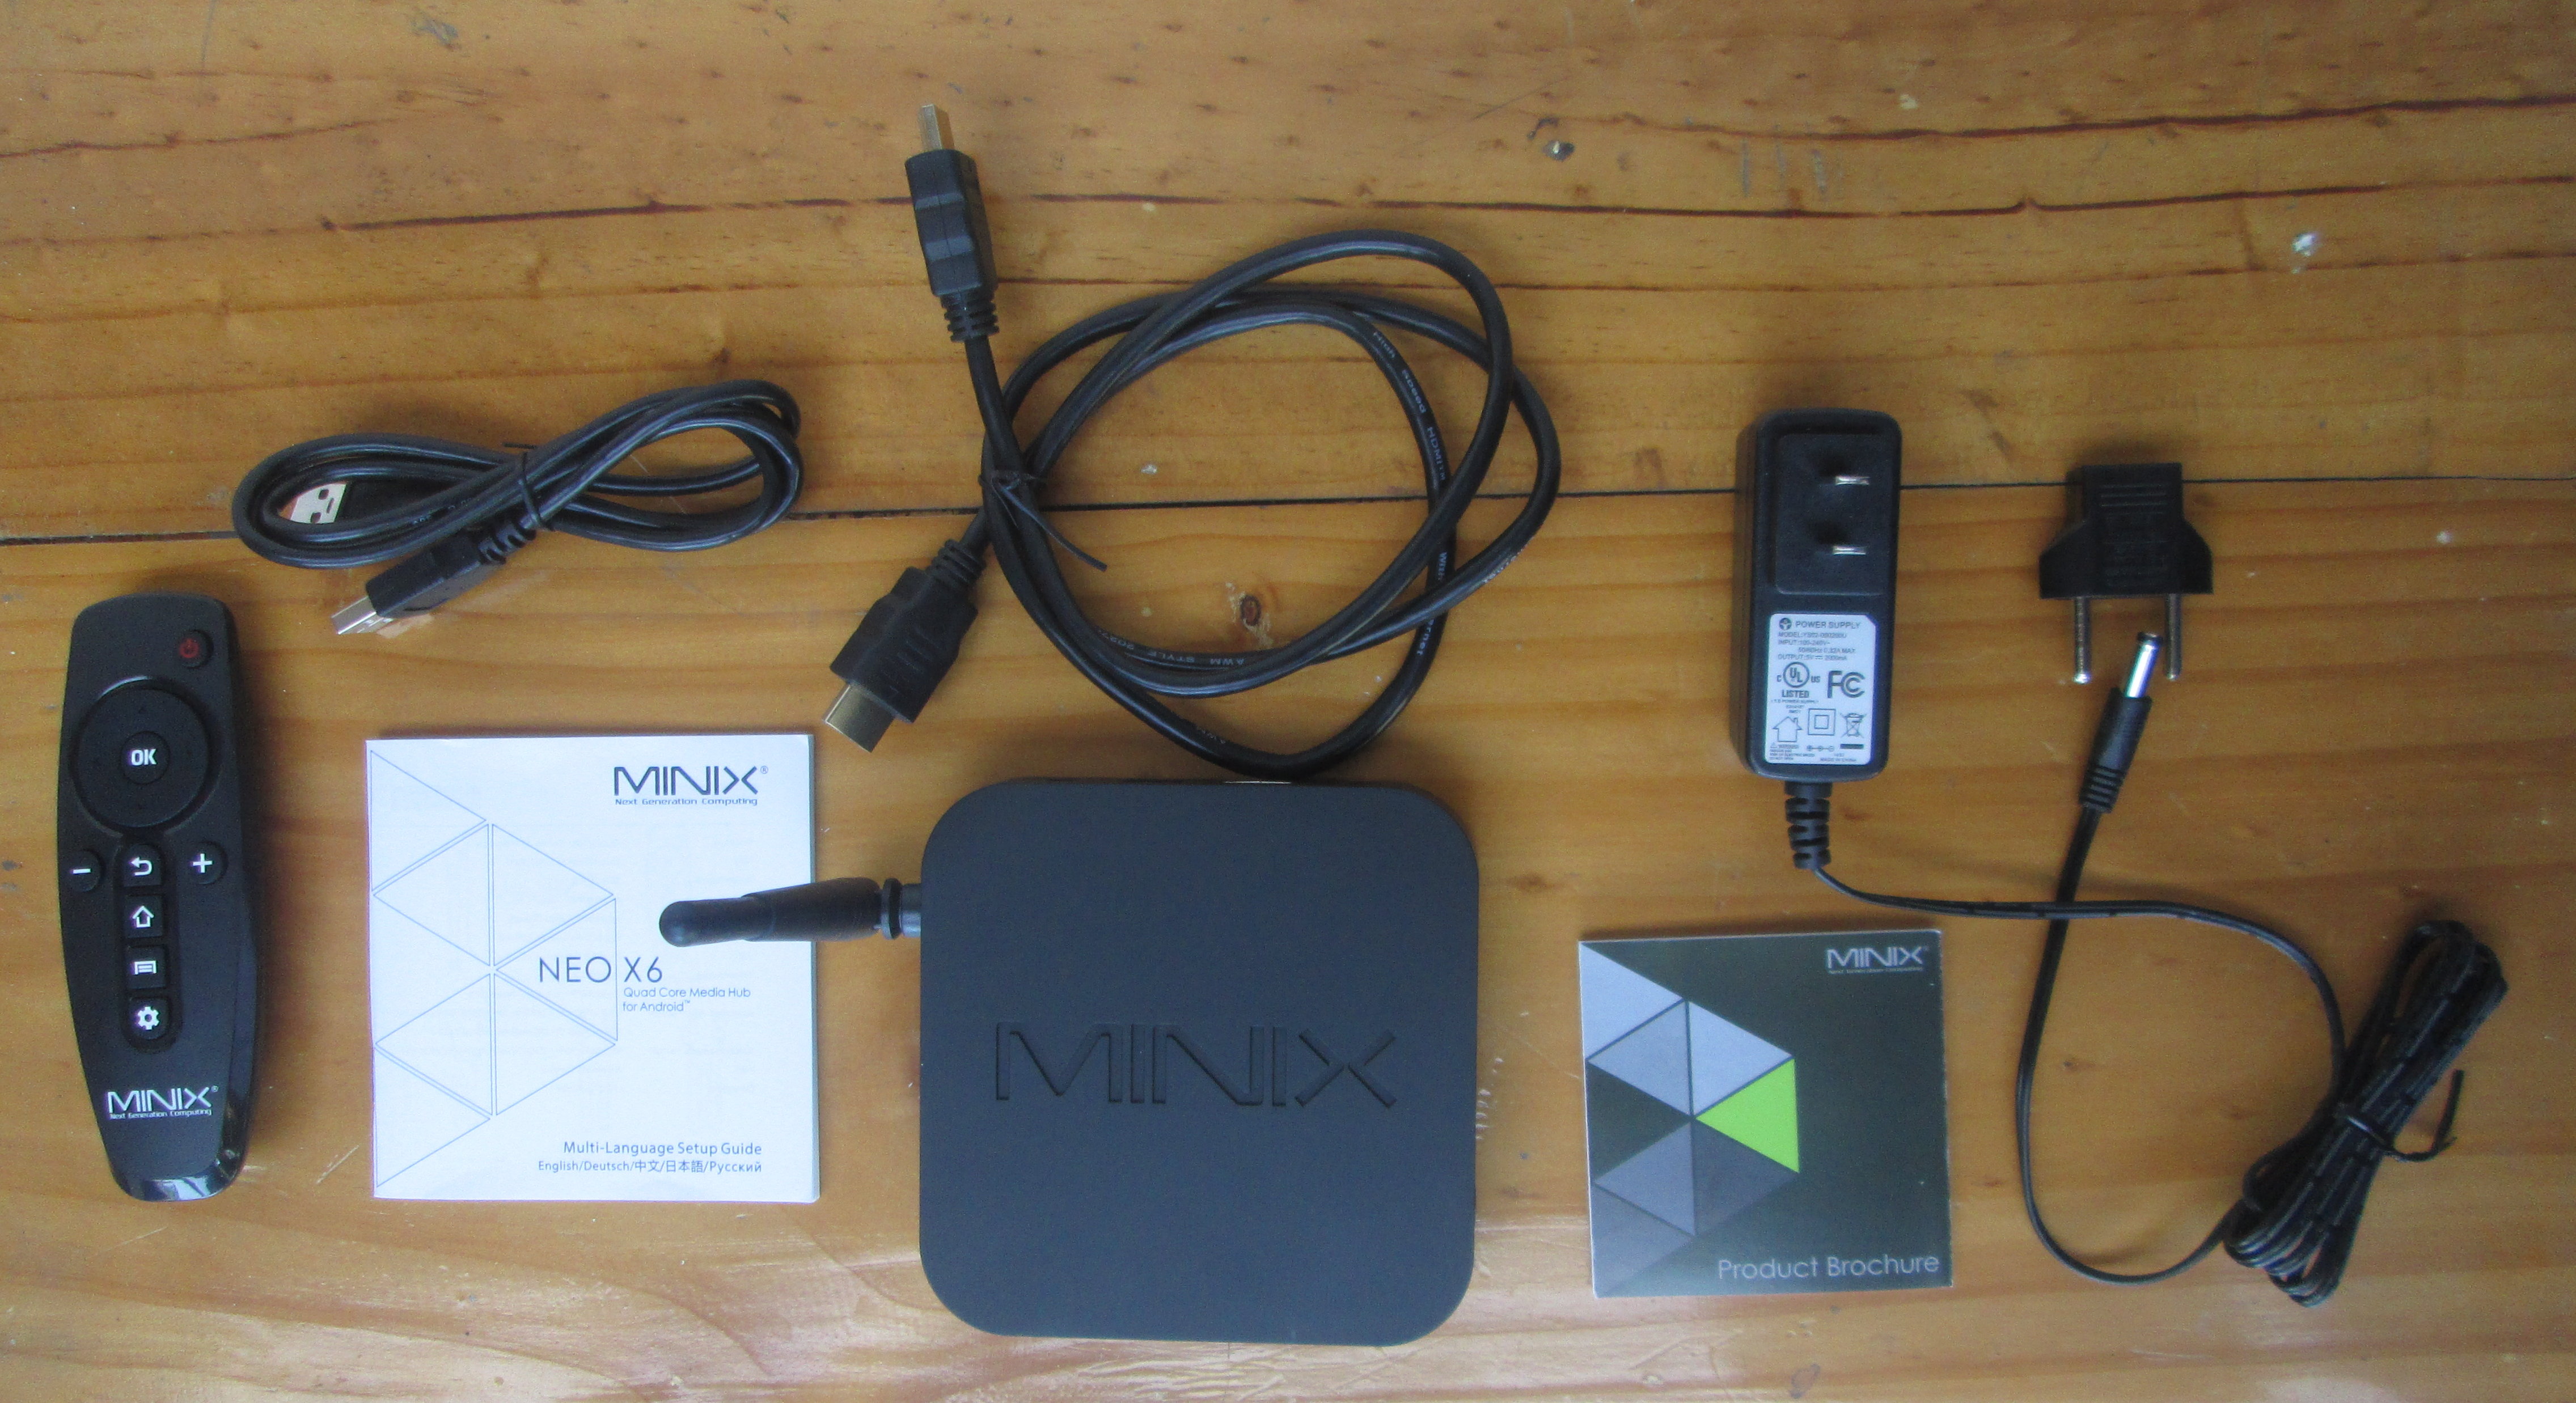 Unboxing of MINIX NEO X6 Android Media Hub